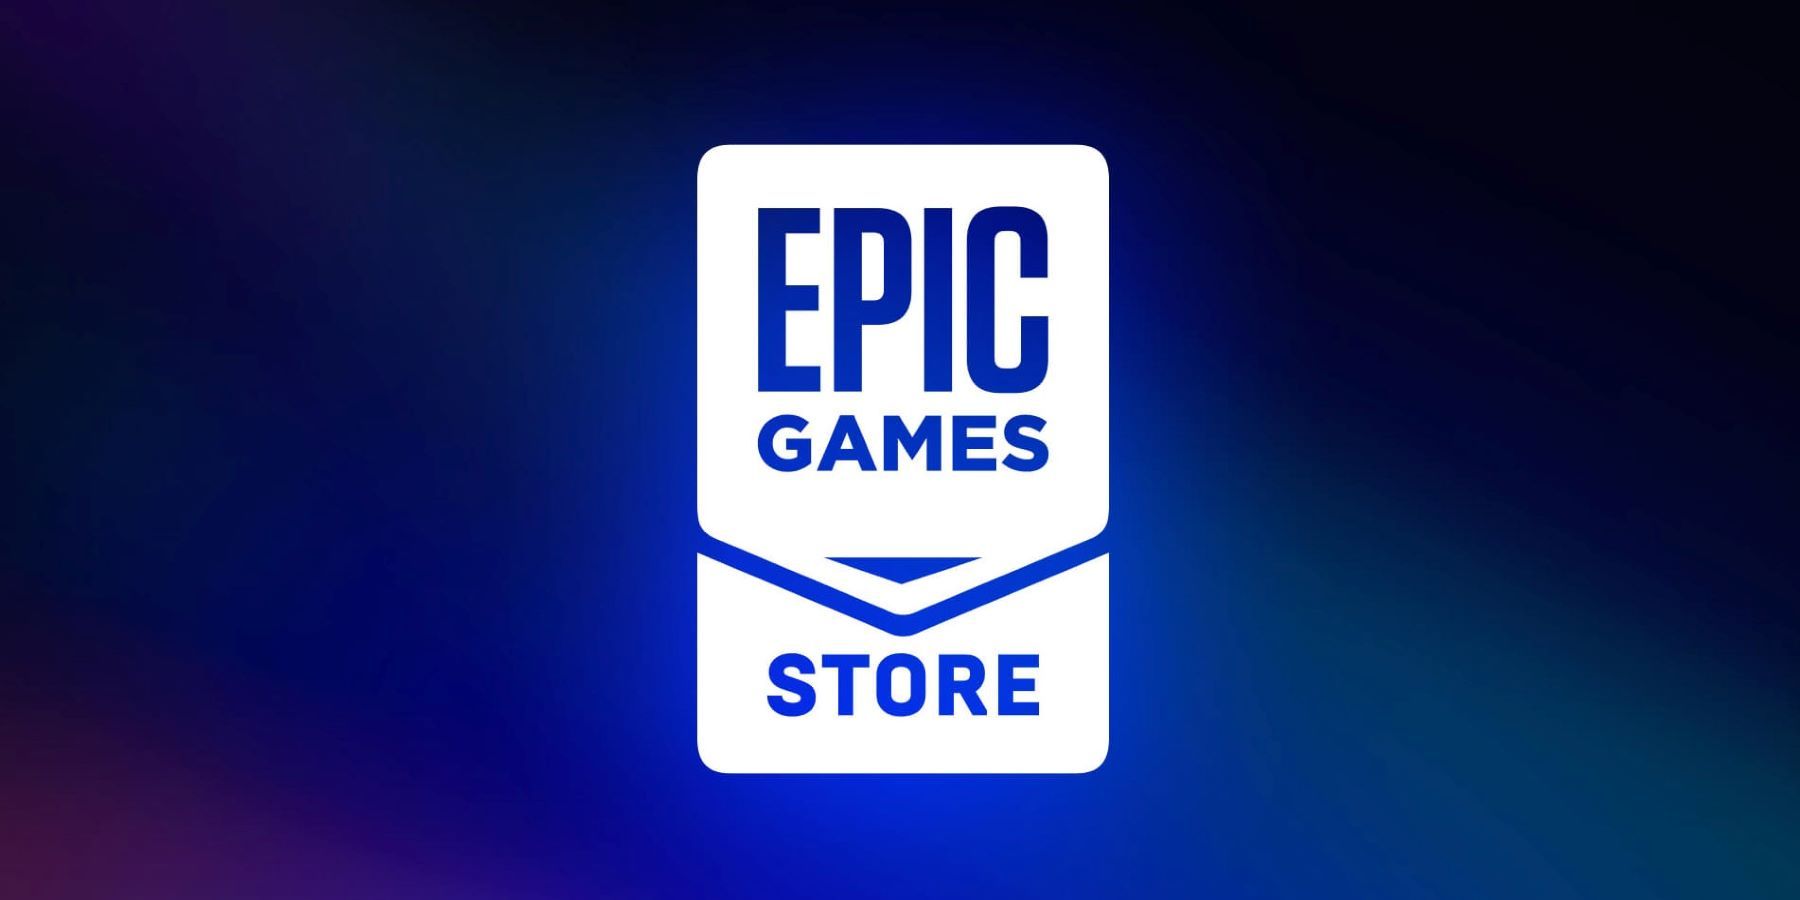 Epic Games Store gets achievements next week—so what's still missing?